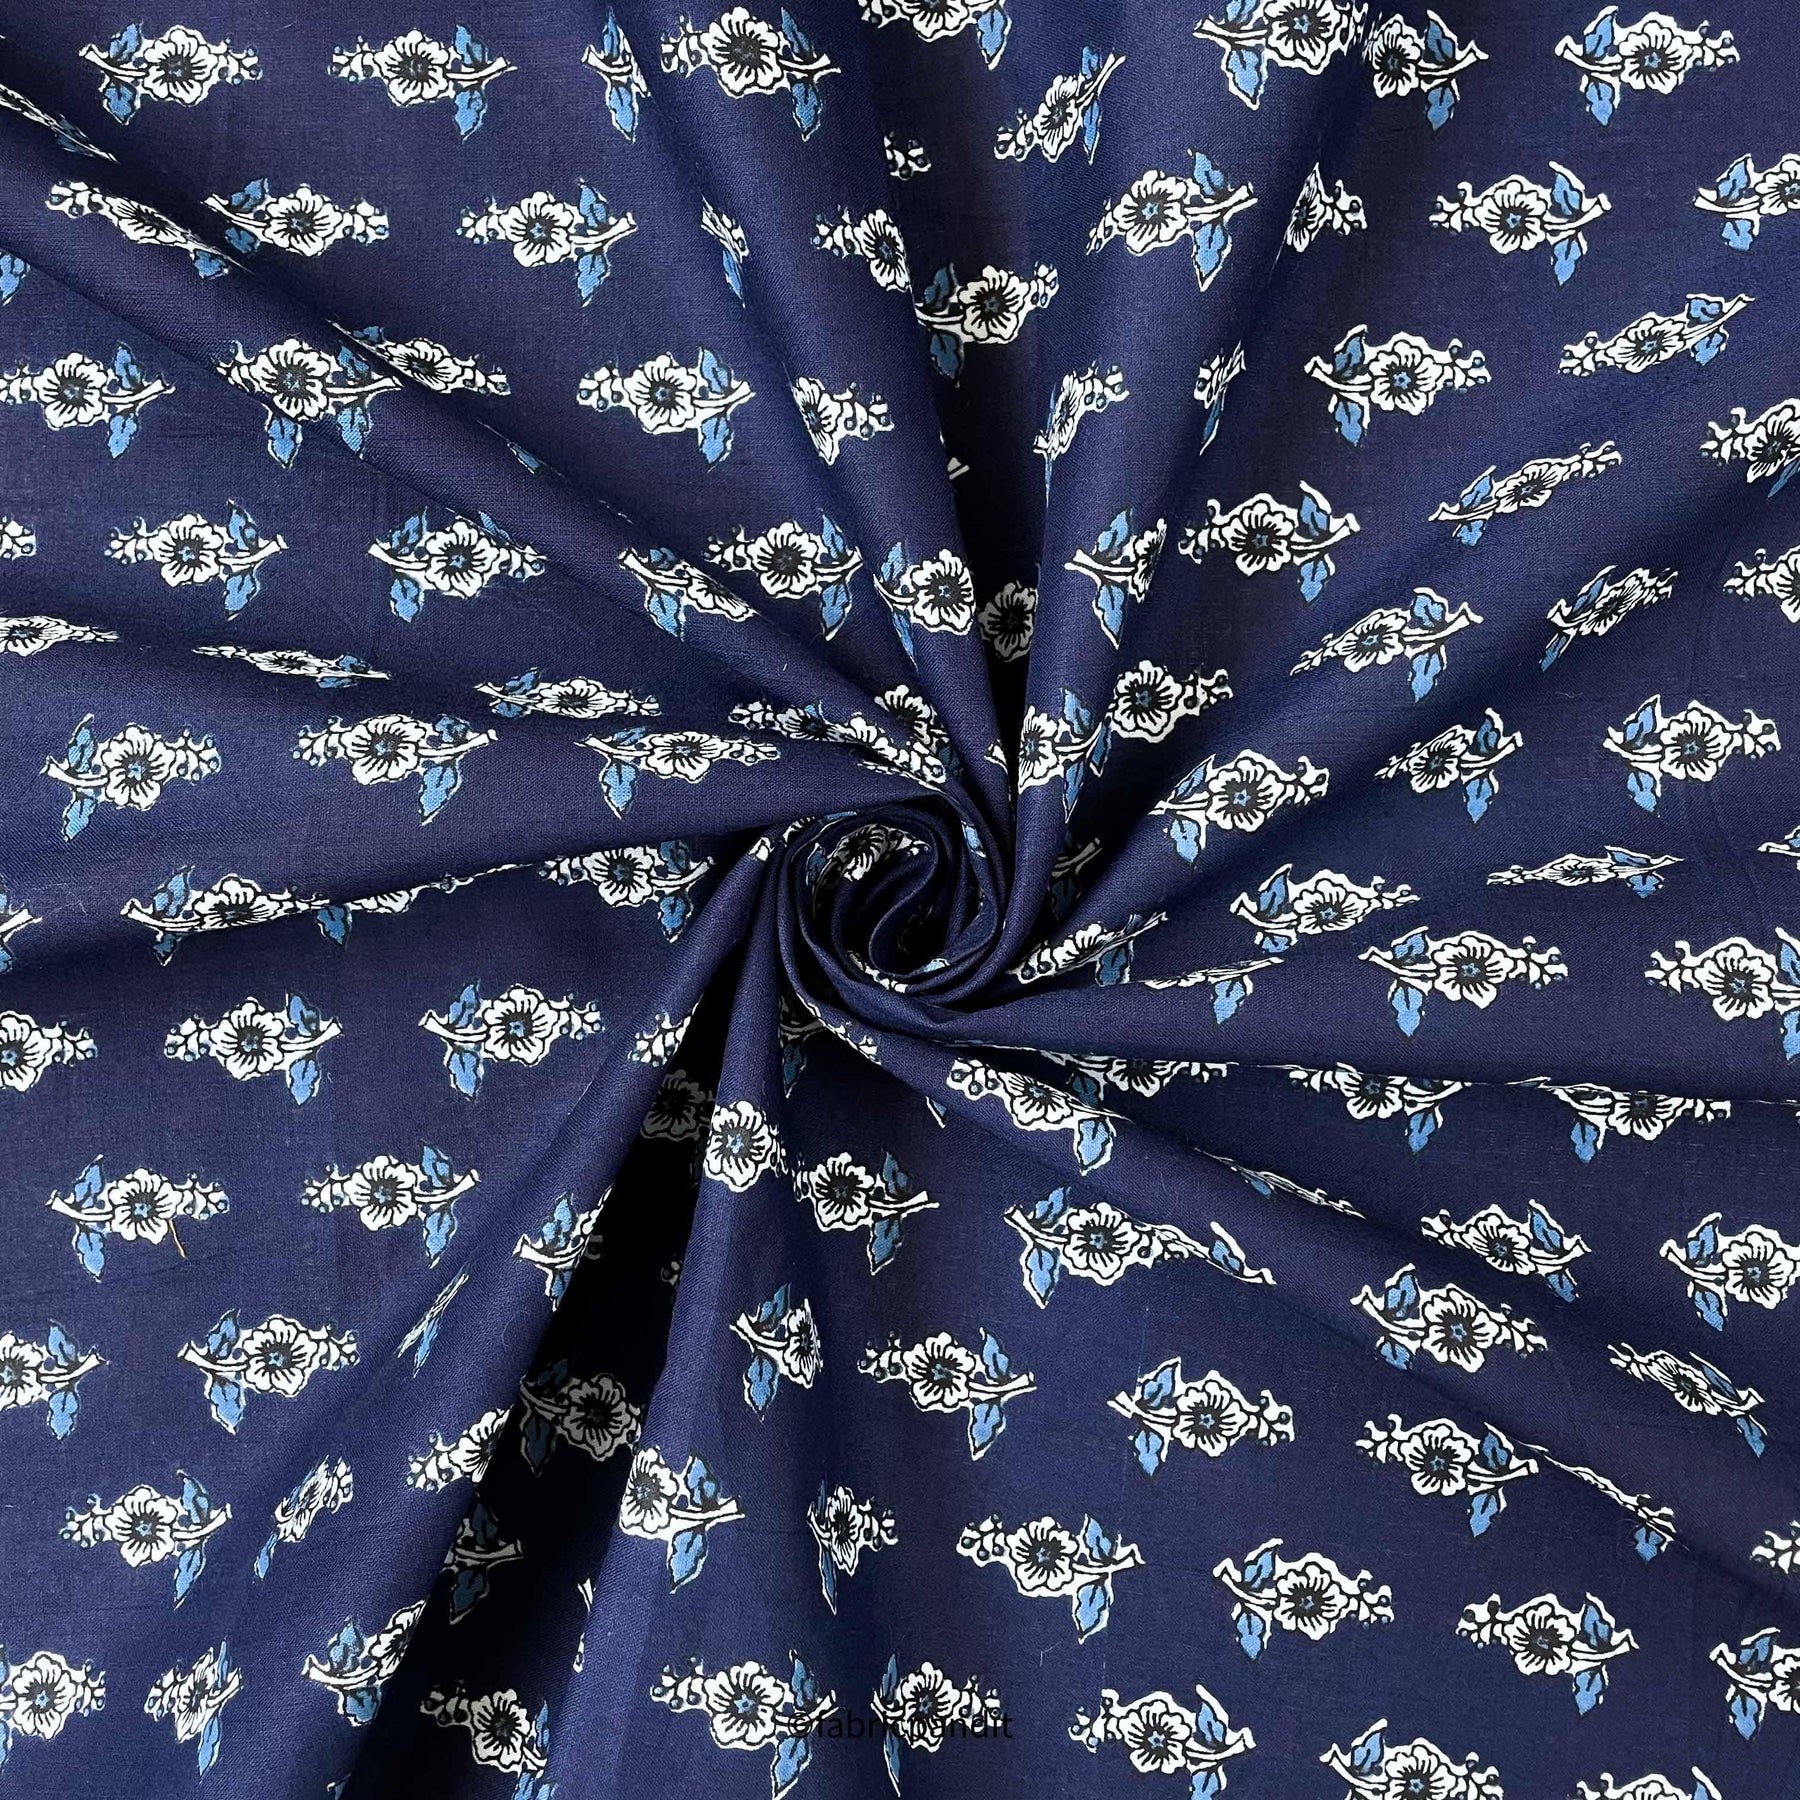 fabric pandit fabric navy blue white sweet peas hand block printed pure cotton fabric width 42 inches